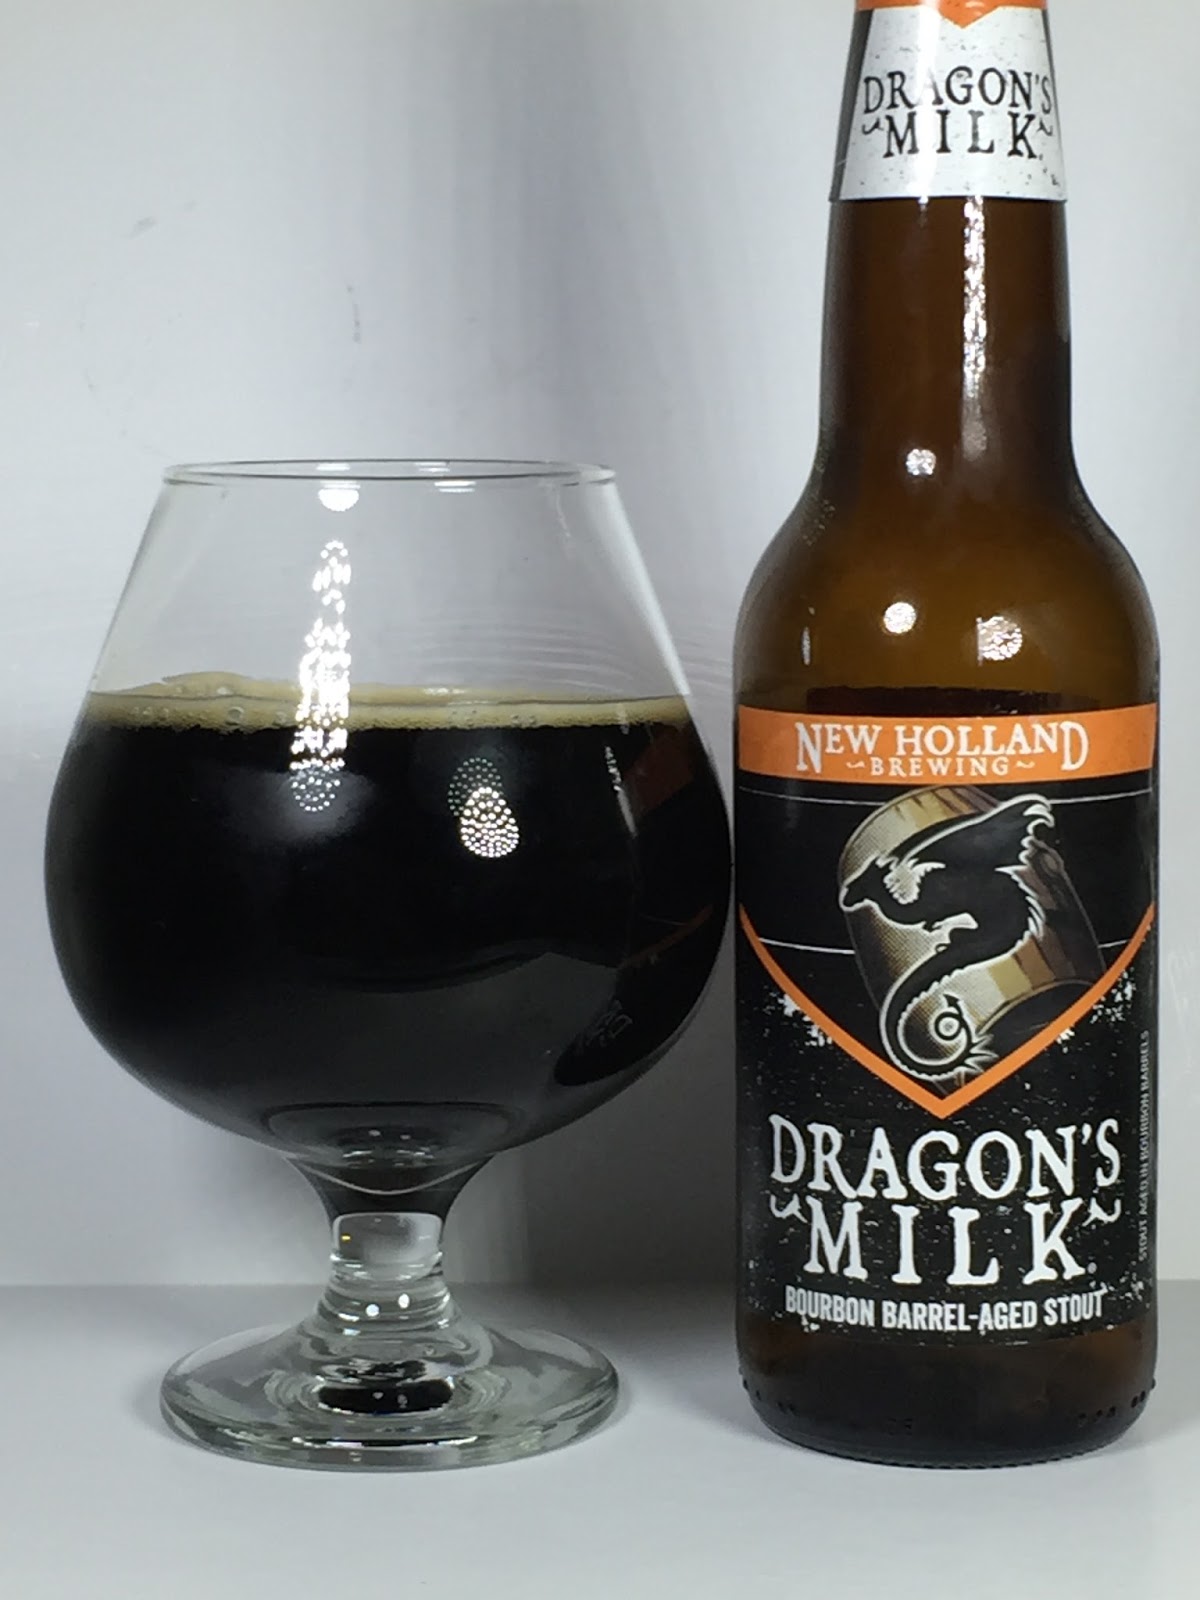 Threw Red Butter S Beer Reviews New Holland Dragon S Milk